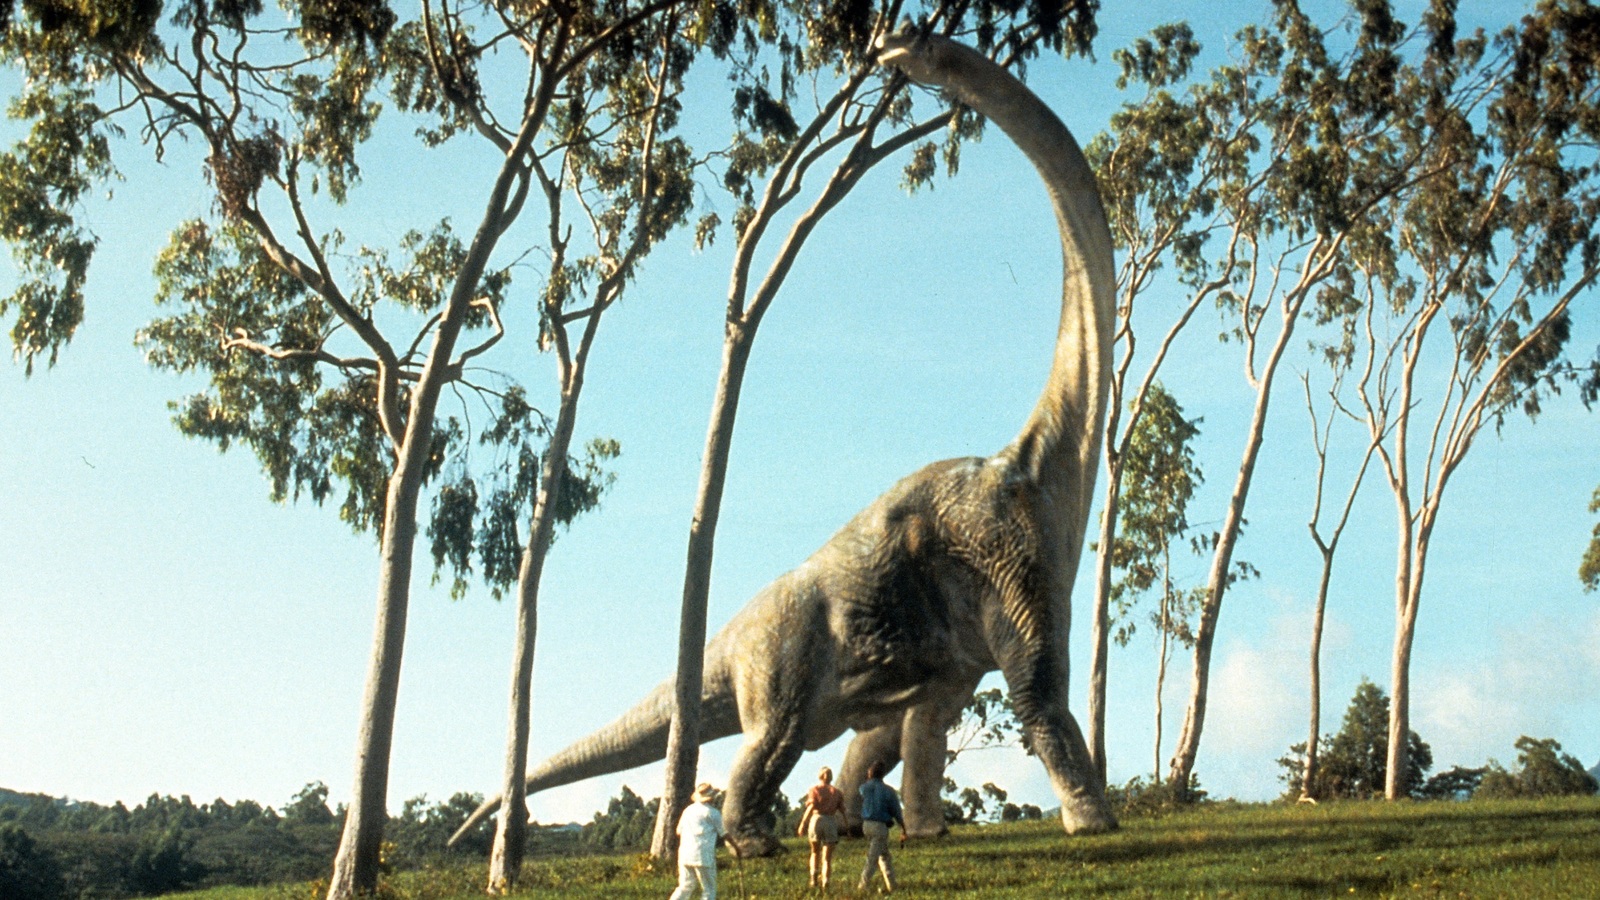 Jurassic Park: Effects Team Brings Dinosaurs Back from Extinction